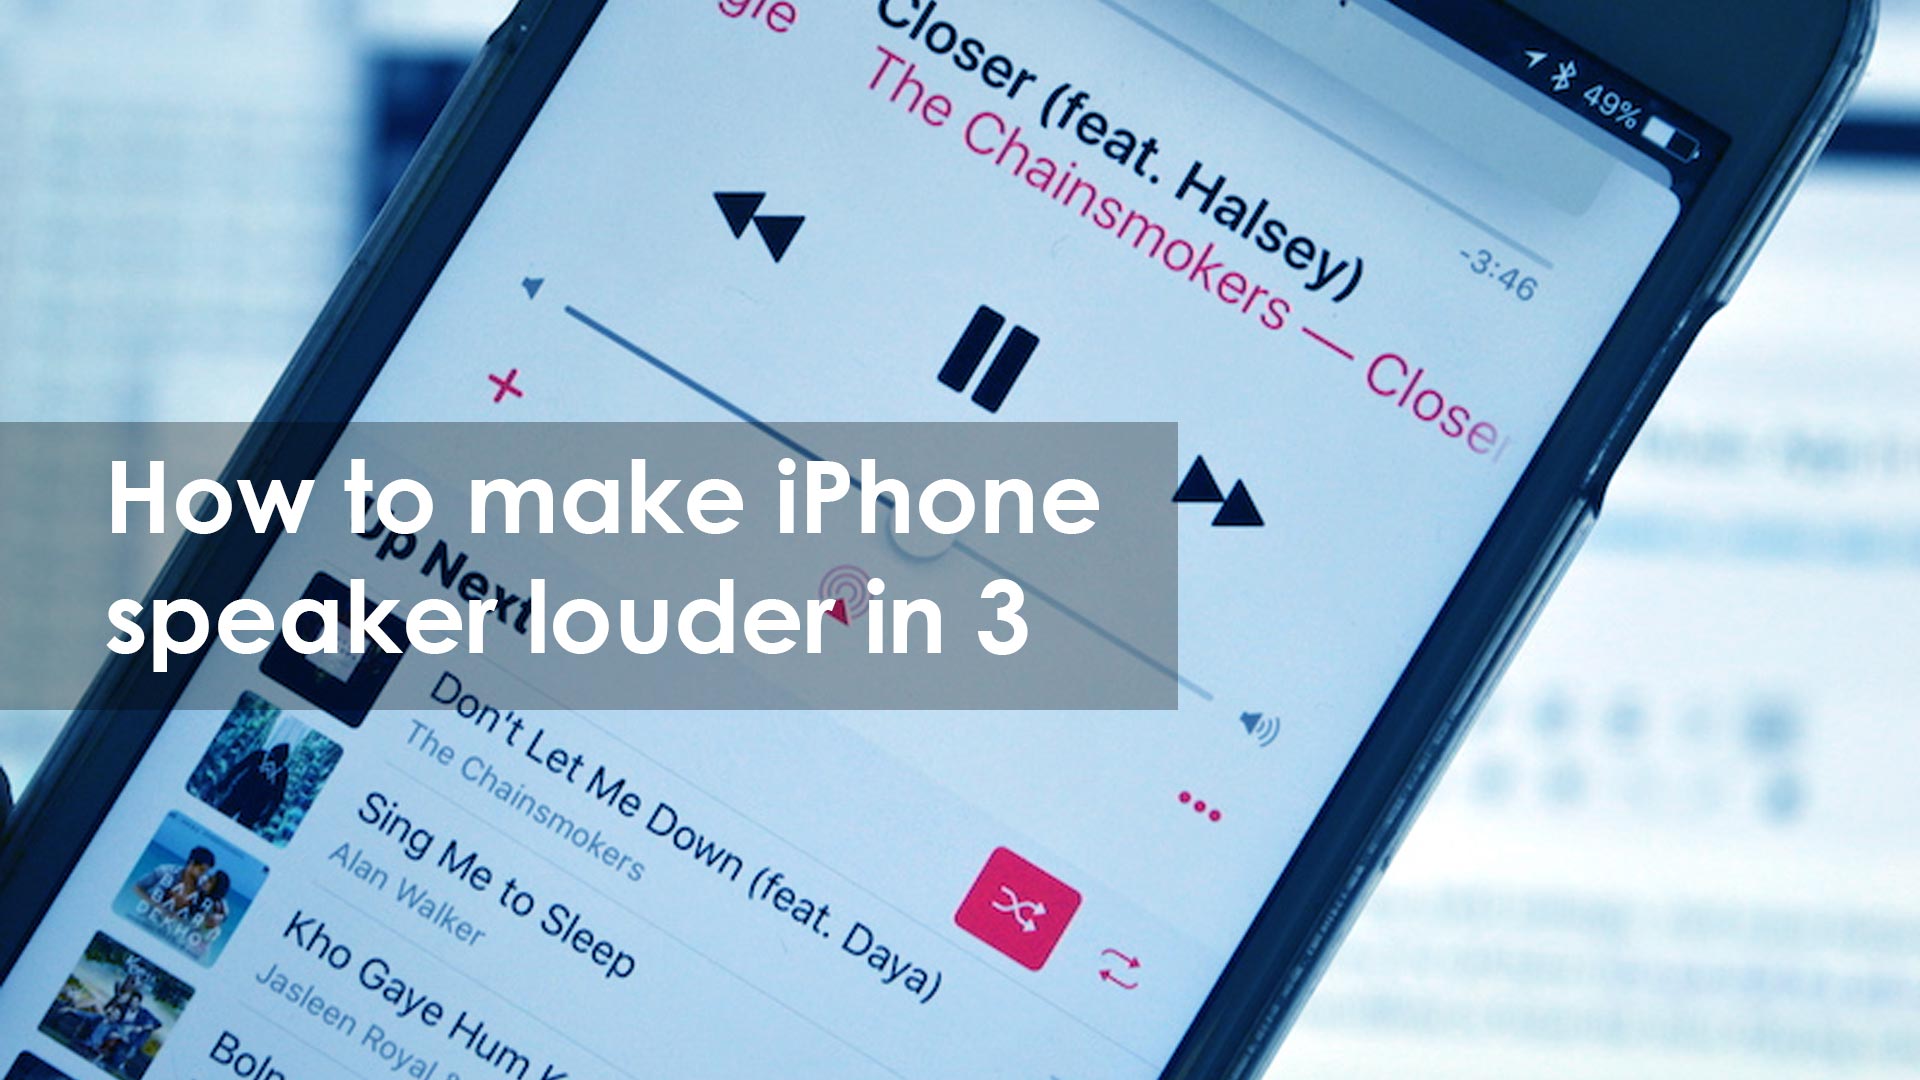 How to make iPhone speaker louder